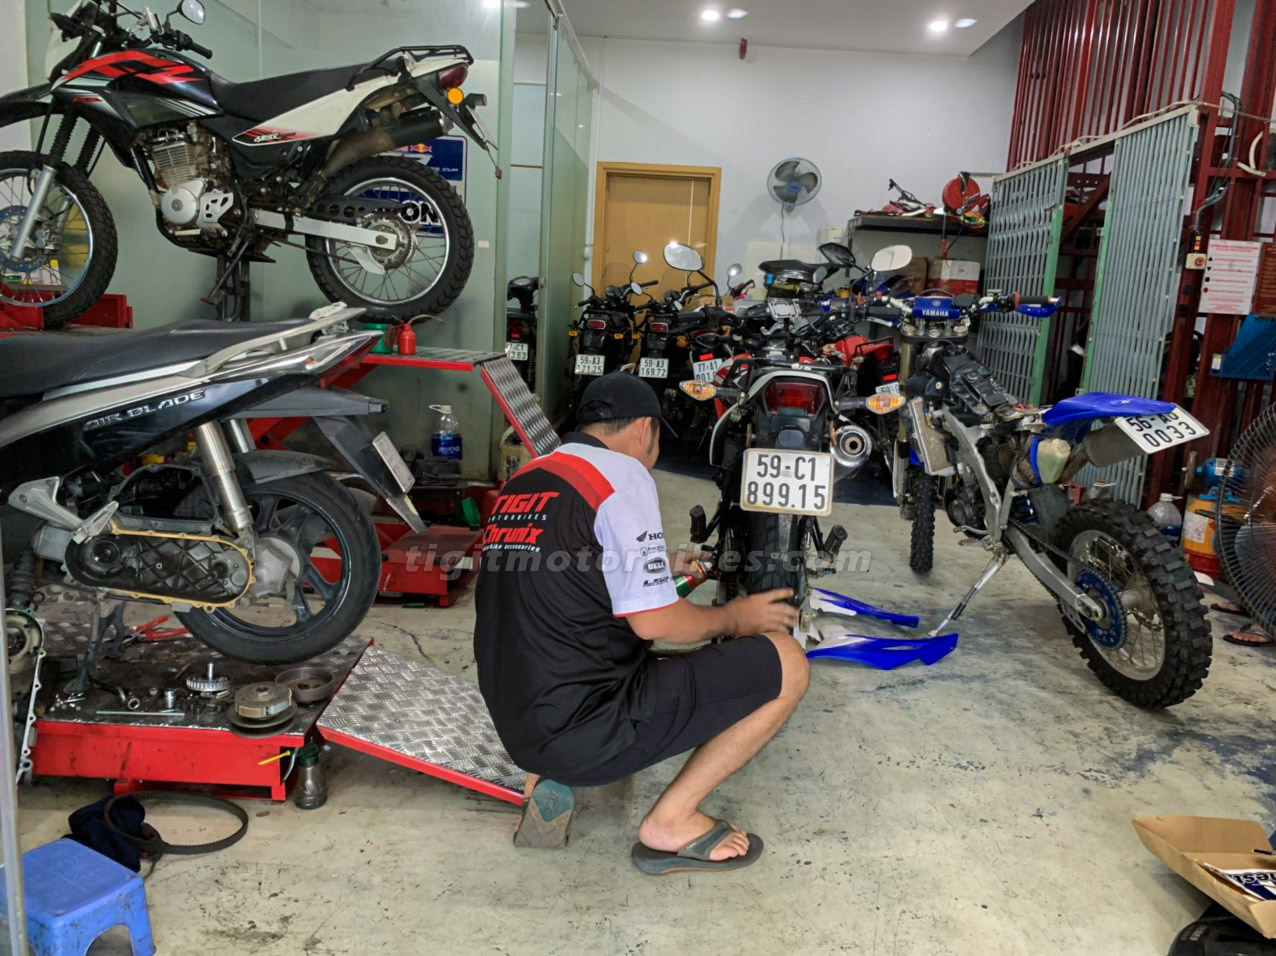 Motorcycle Maintenance Schedule For Lazy Riders